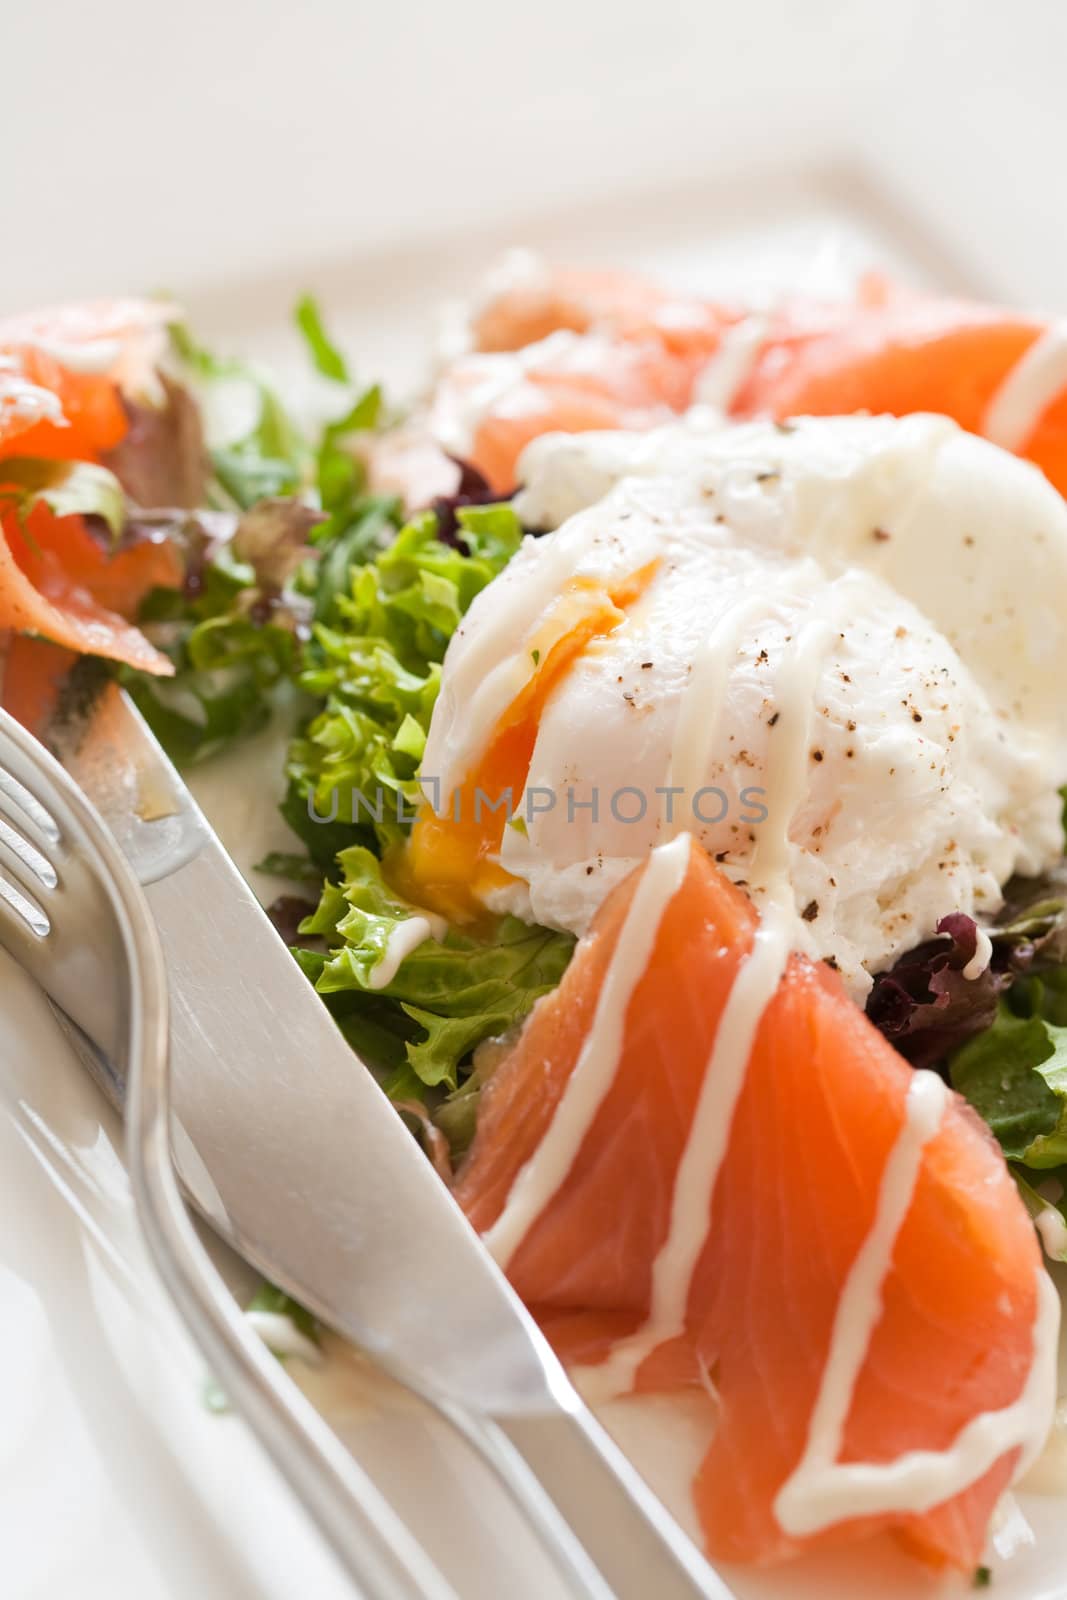 Appetizer with smoked salmon and a poached egg